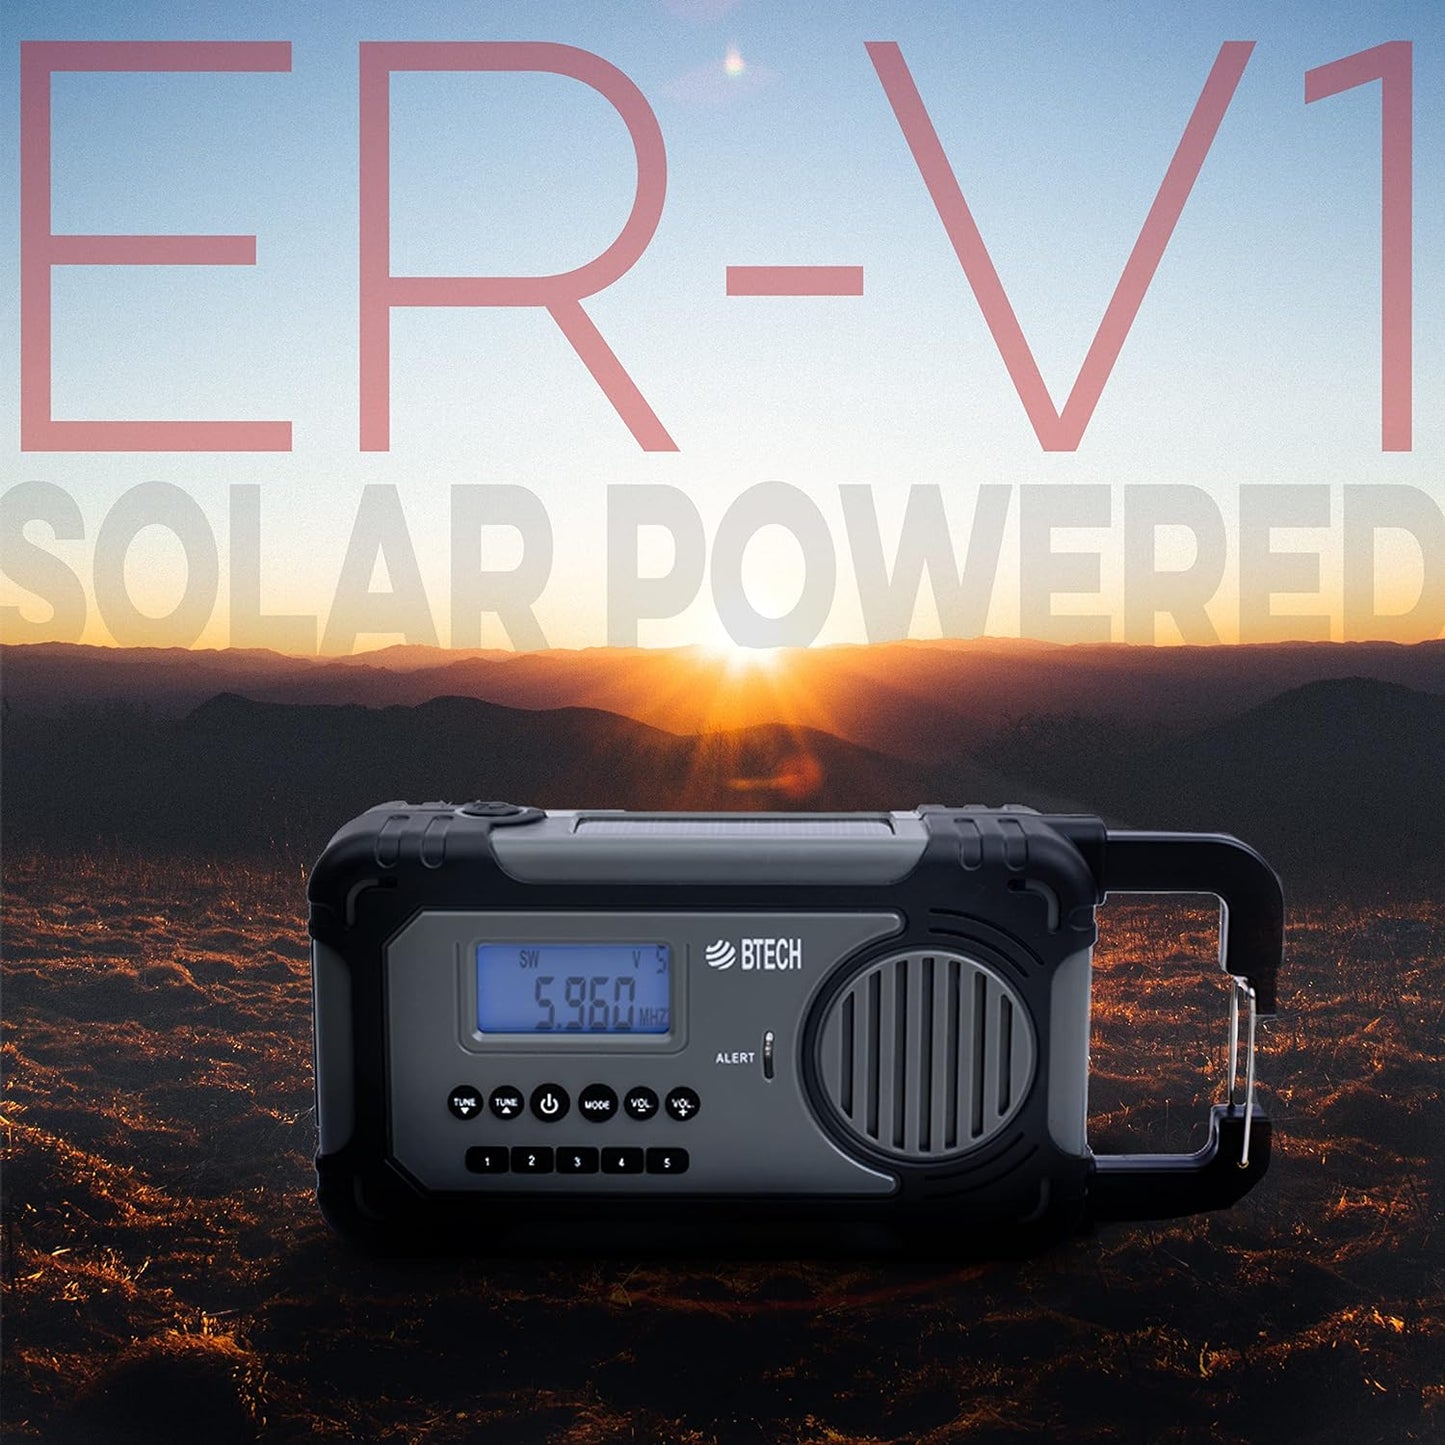 BTECH ER-V1 Emergency Solar Hand Crank Portable Radio, AM/FM/NOAA/SW Radio Receiver, 5 Ways to Power with 2000mAh Power Bank Phone Charger, USB Charger and LED Flashlight